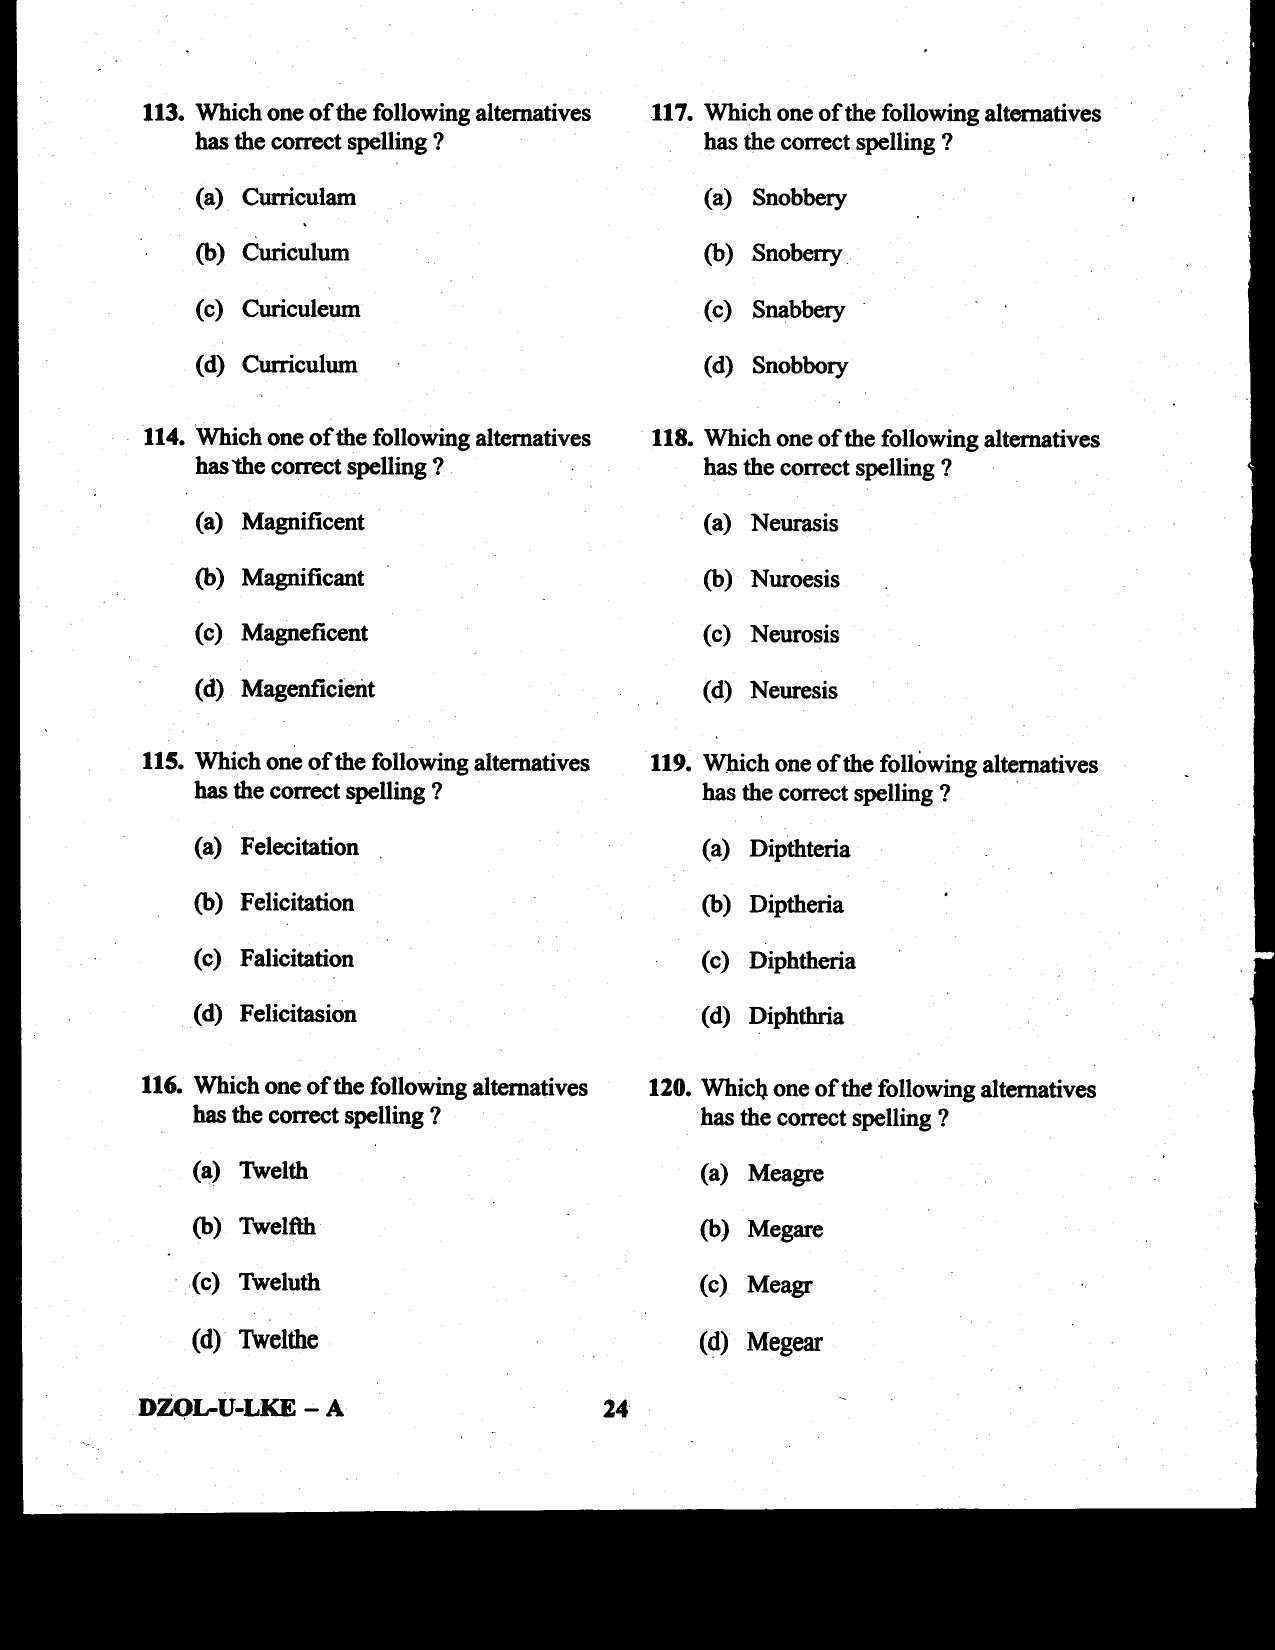 CDS II Examination 2020 English Question Paper - Image 24